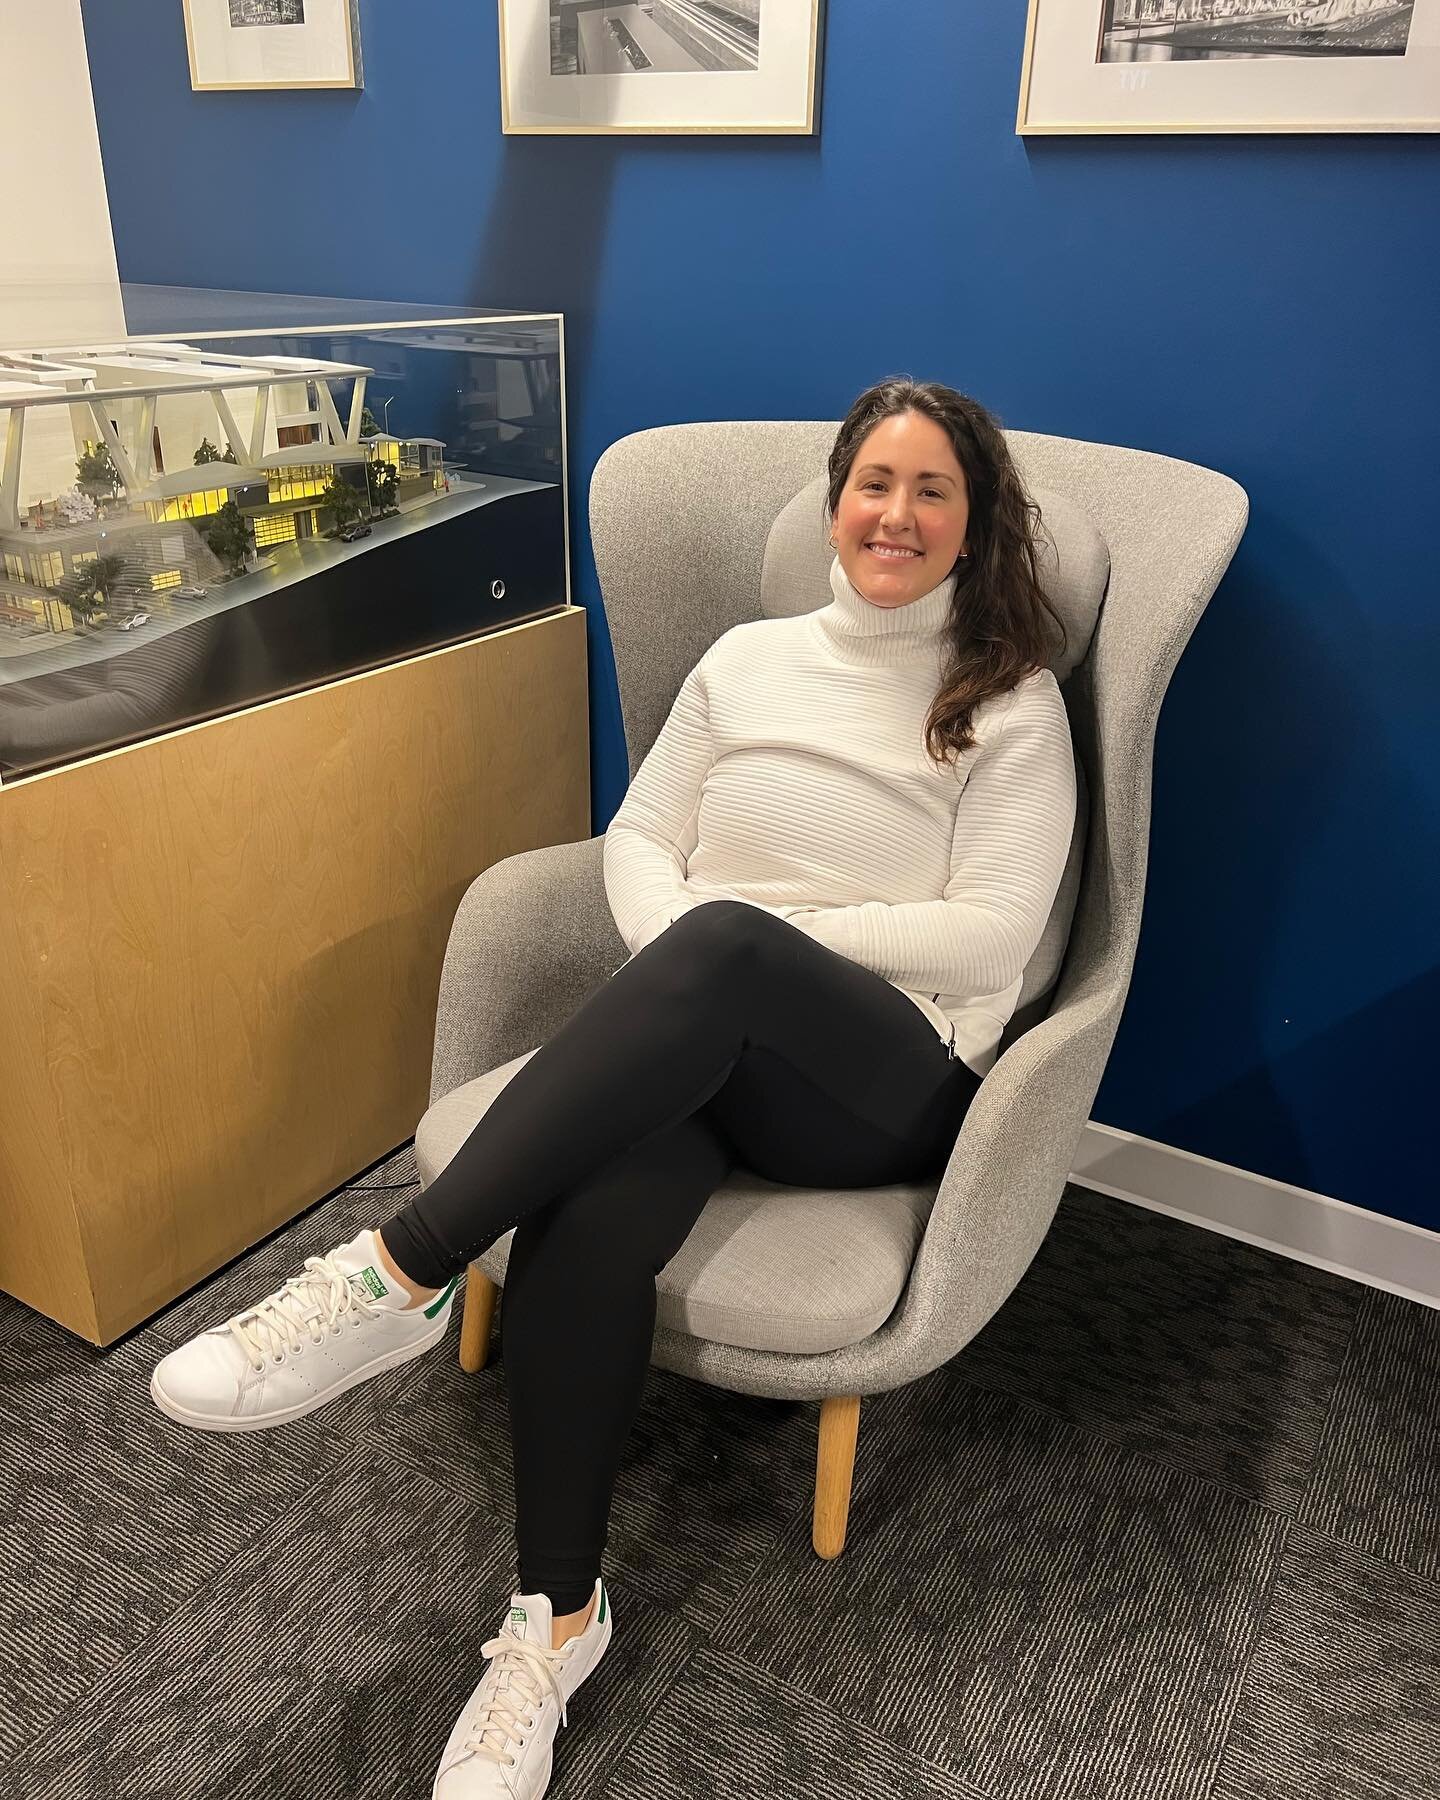 Relaxing in a lovely The Ro&trade; lounge that I spotted @2andu in Seattle! My very own Ro sample arrives in a couple weeks - who wants to take it for a spin?

Designed by @jaimehayon for @fritzhansen and aptly named after the Danish word for &lsquo;